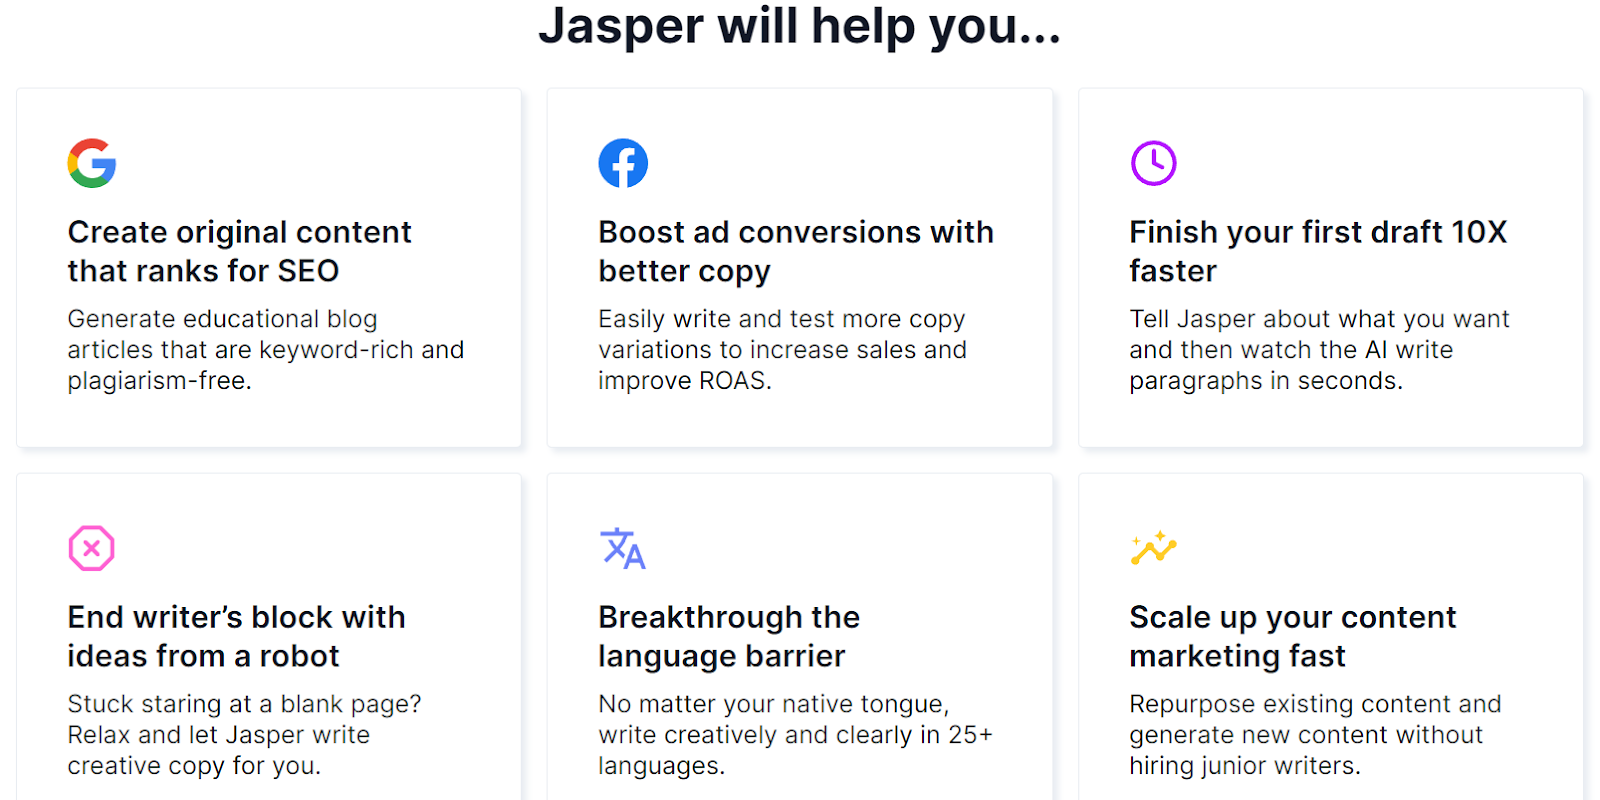 Here are some templates and tools you can use in Jasper for marketing purposes.